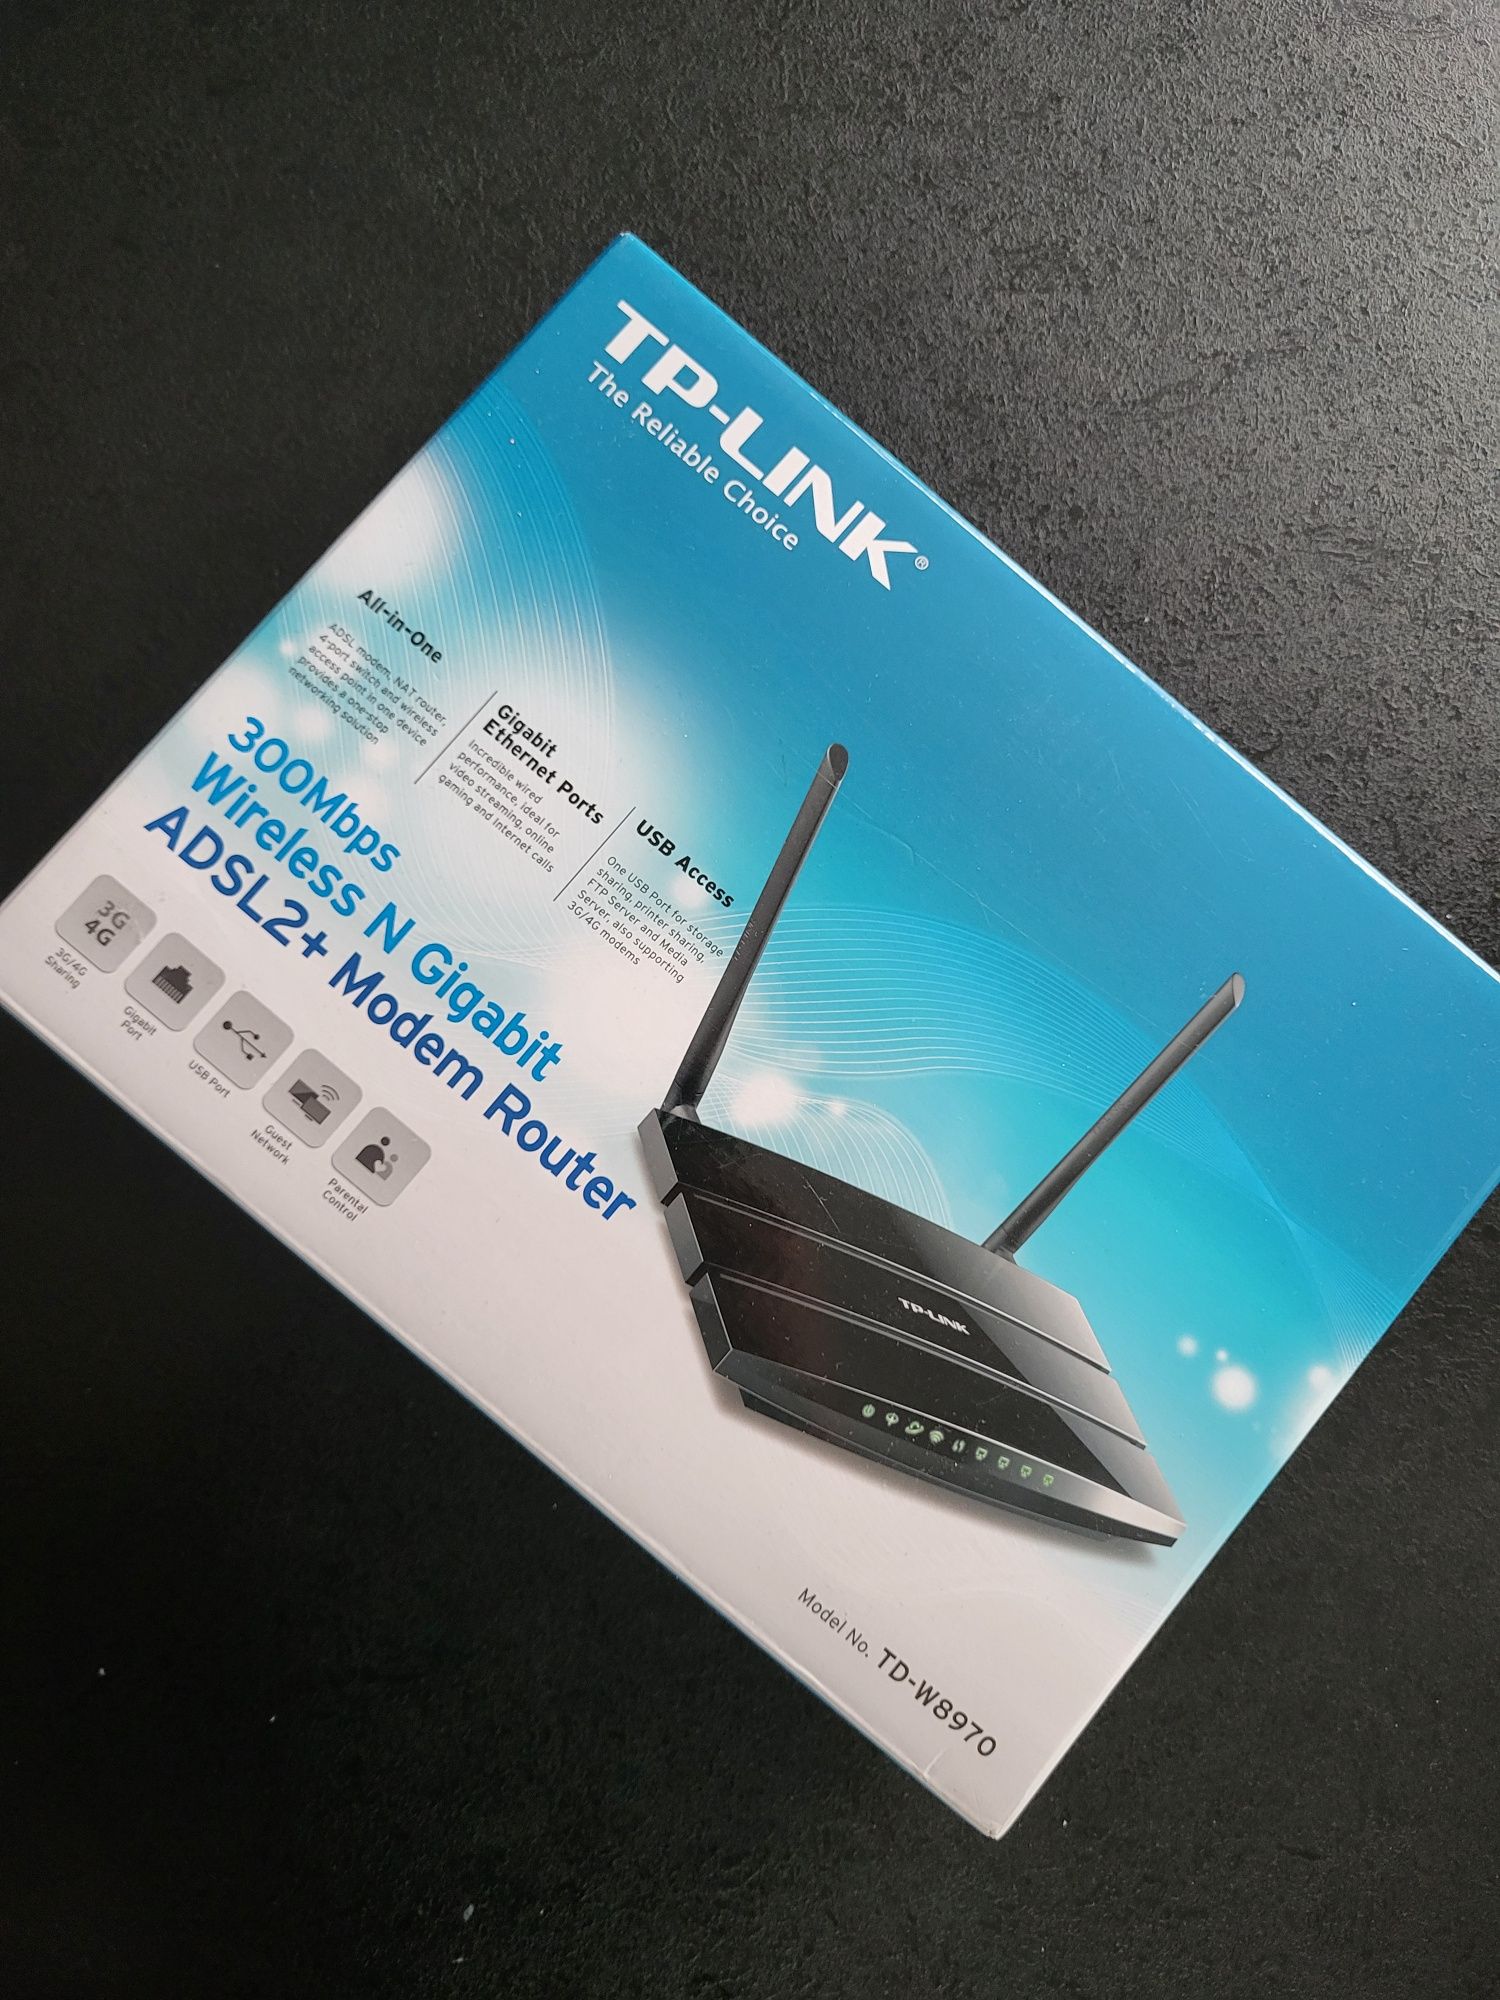 Router TP-Link TD-W8970 (300Mb/s)